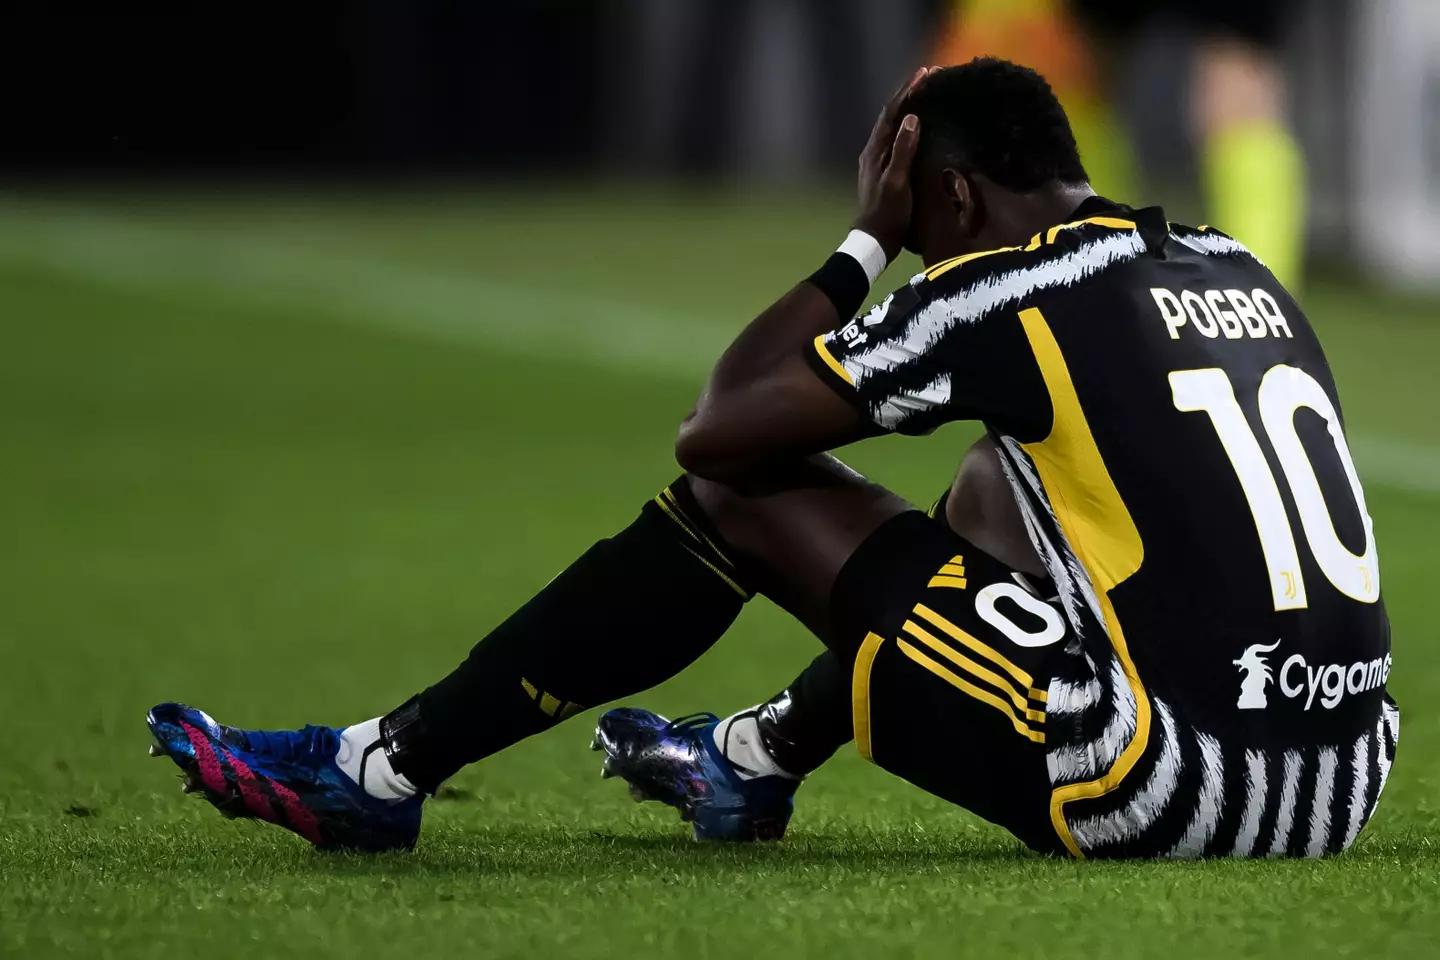 Paul Pogba cuts a frustrated figure after suffering an injury. Image: Alamy 